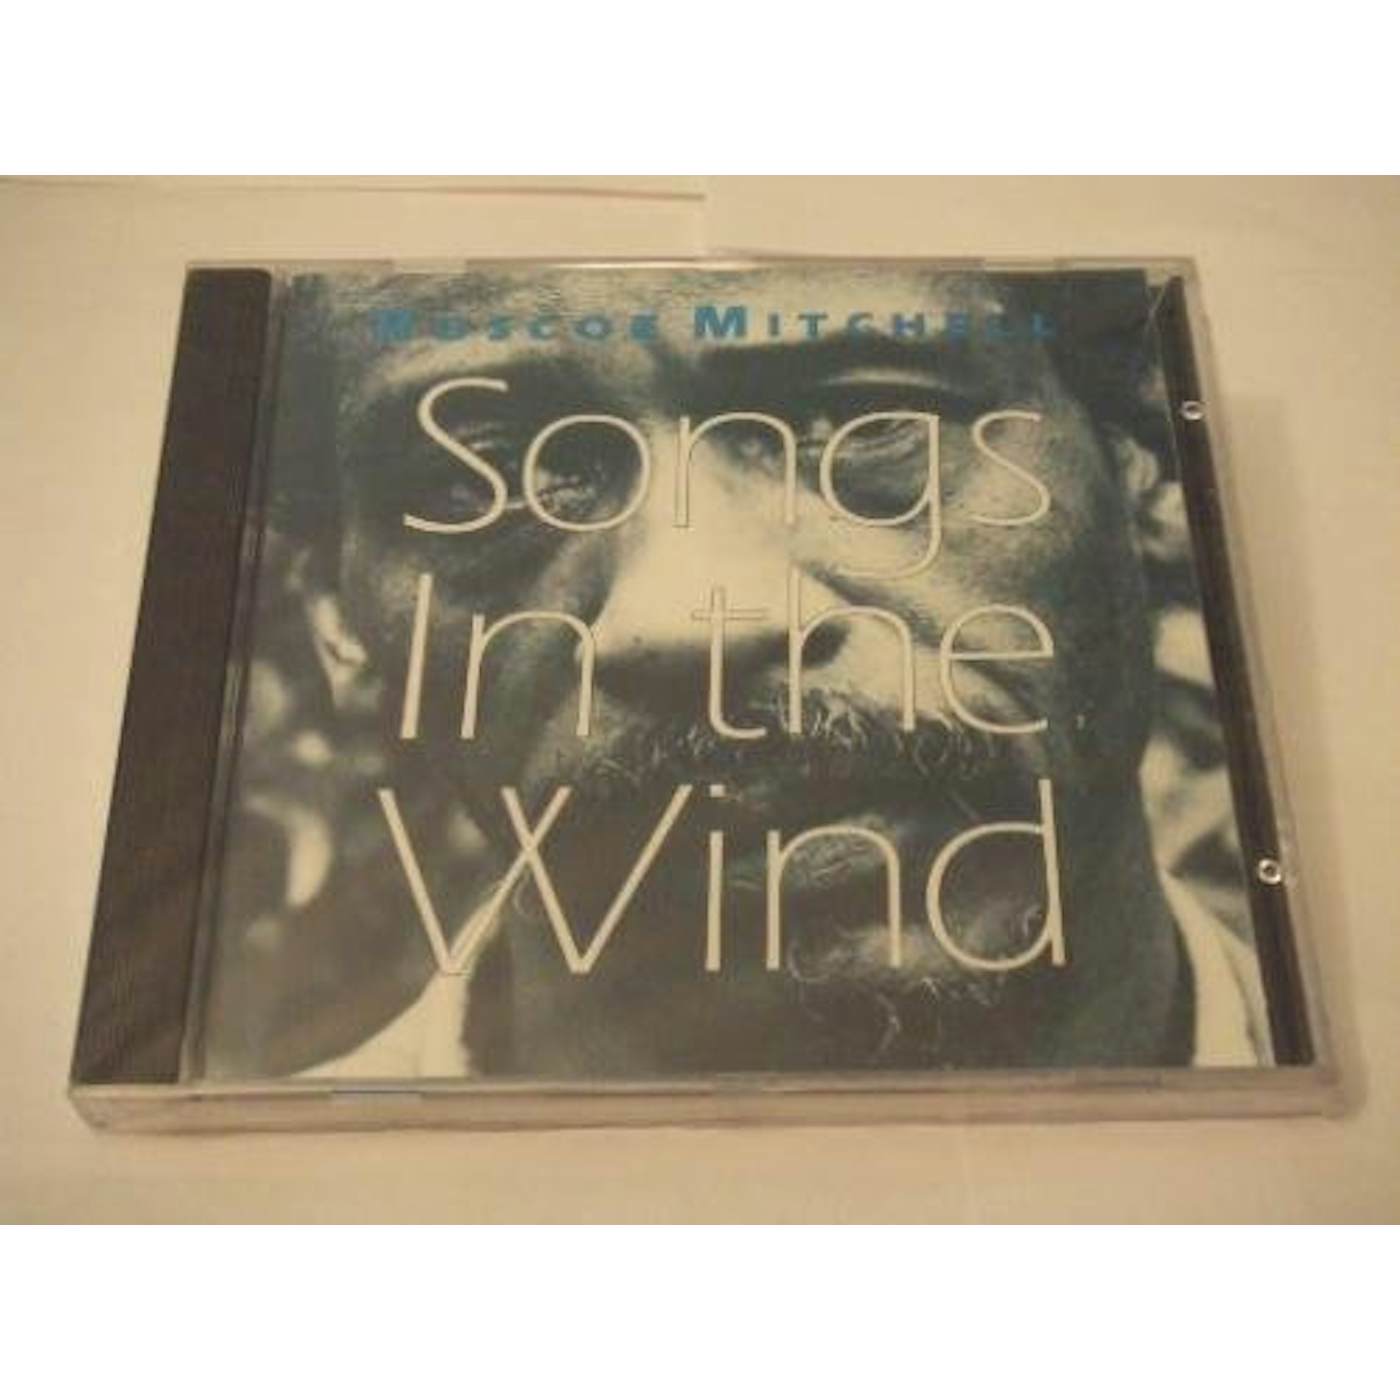 Roscoe Mitchell SONGS IN THE WIND CD